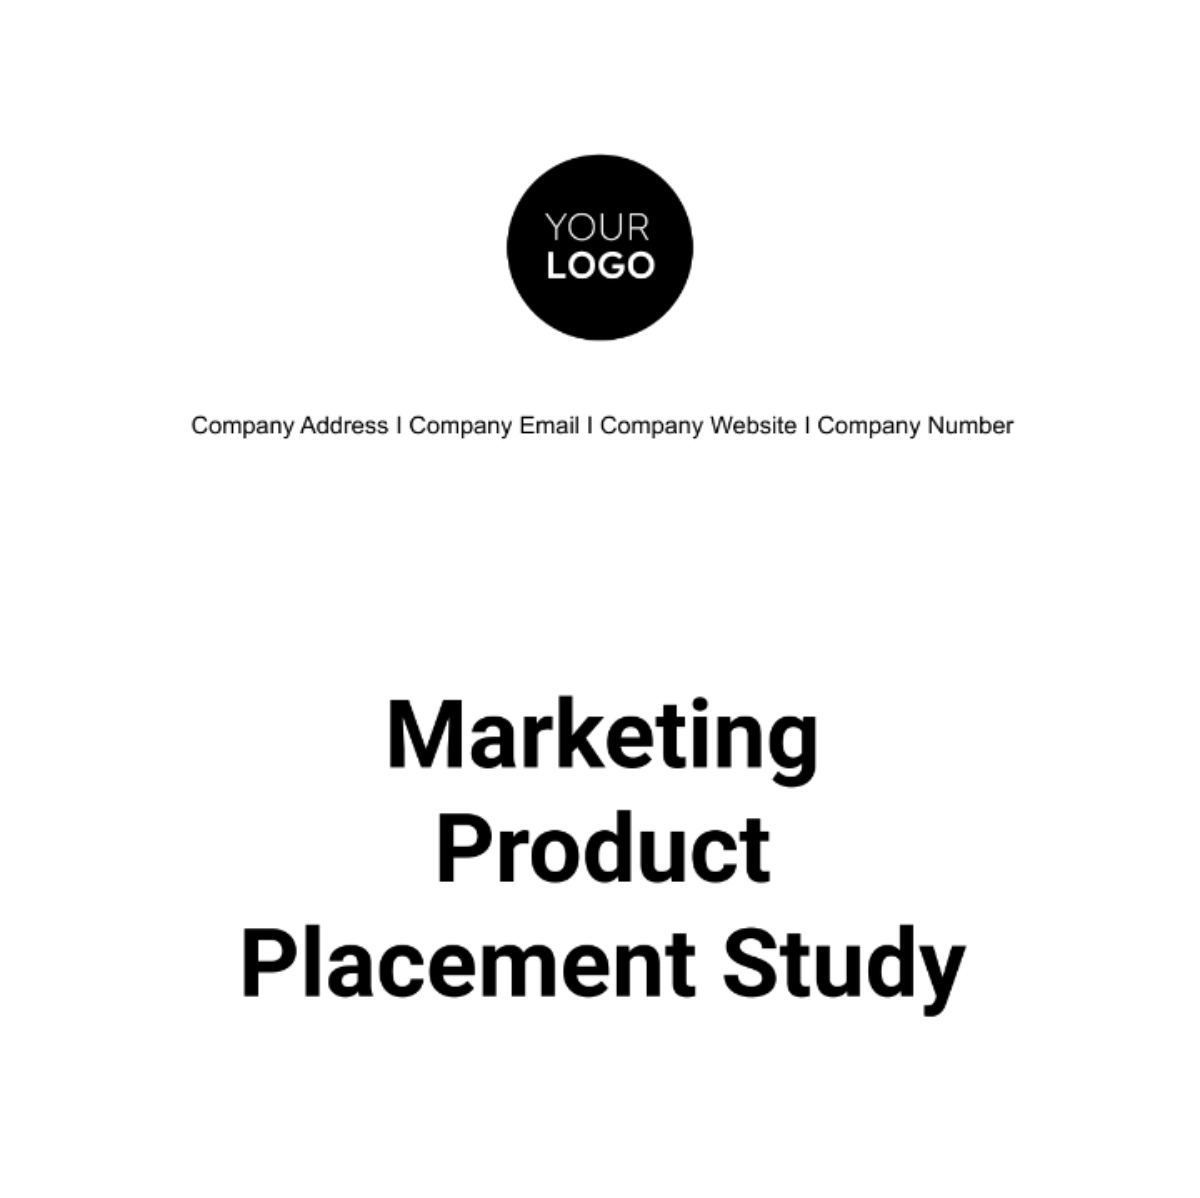 Marketing Product Placement Study Template